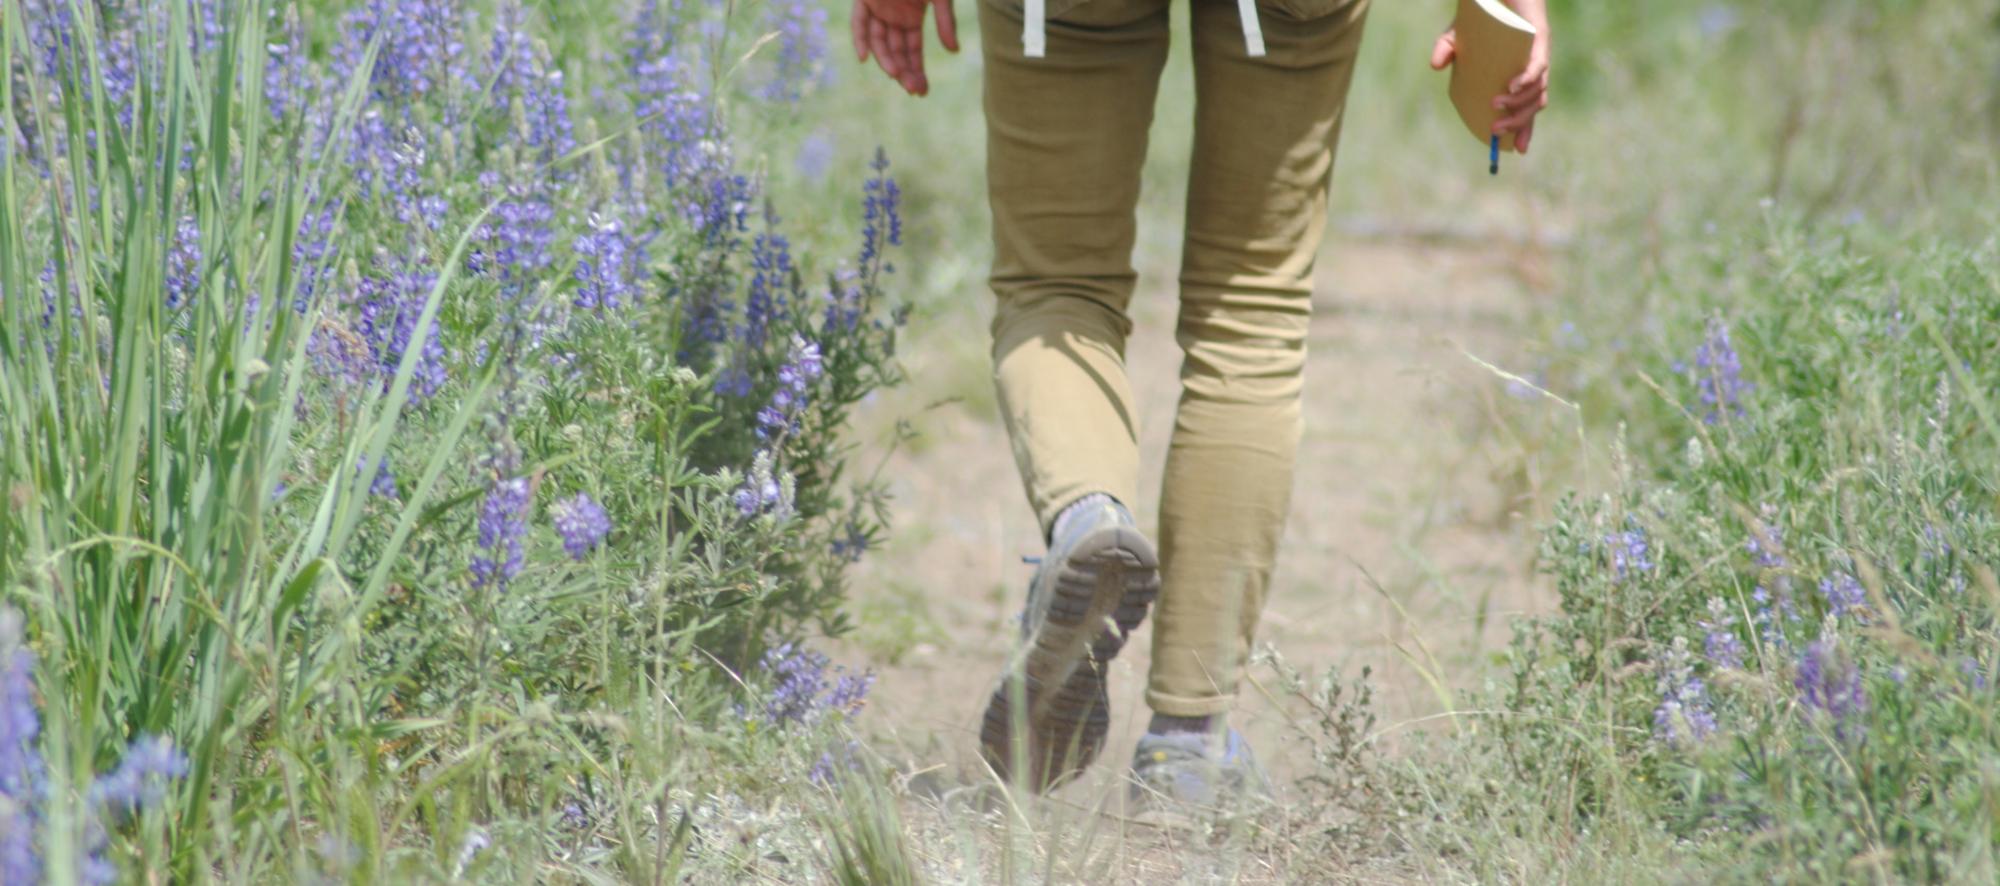 A person walking on a path through a field of wildflowers